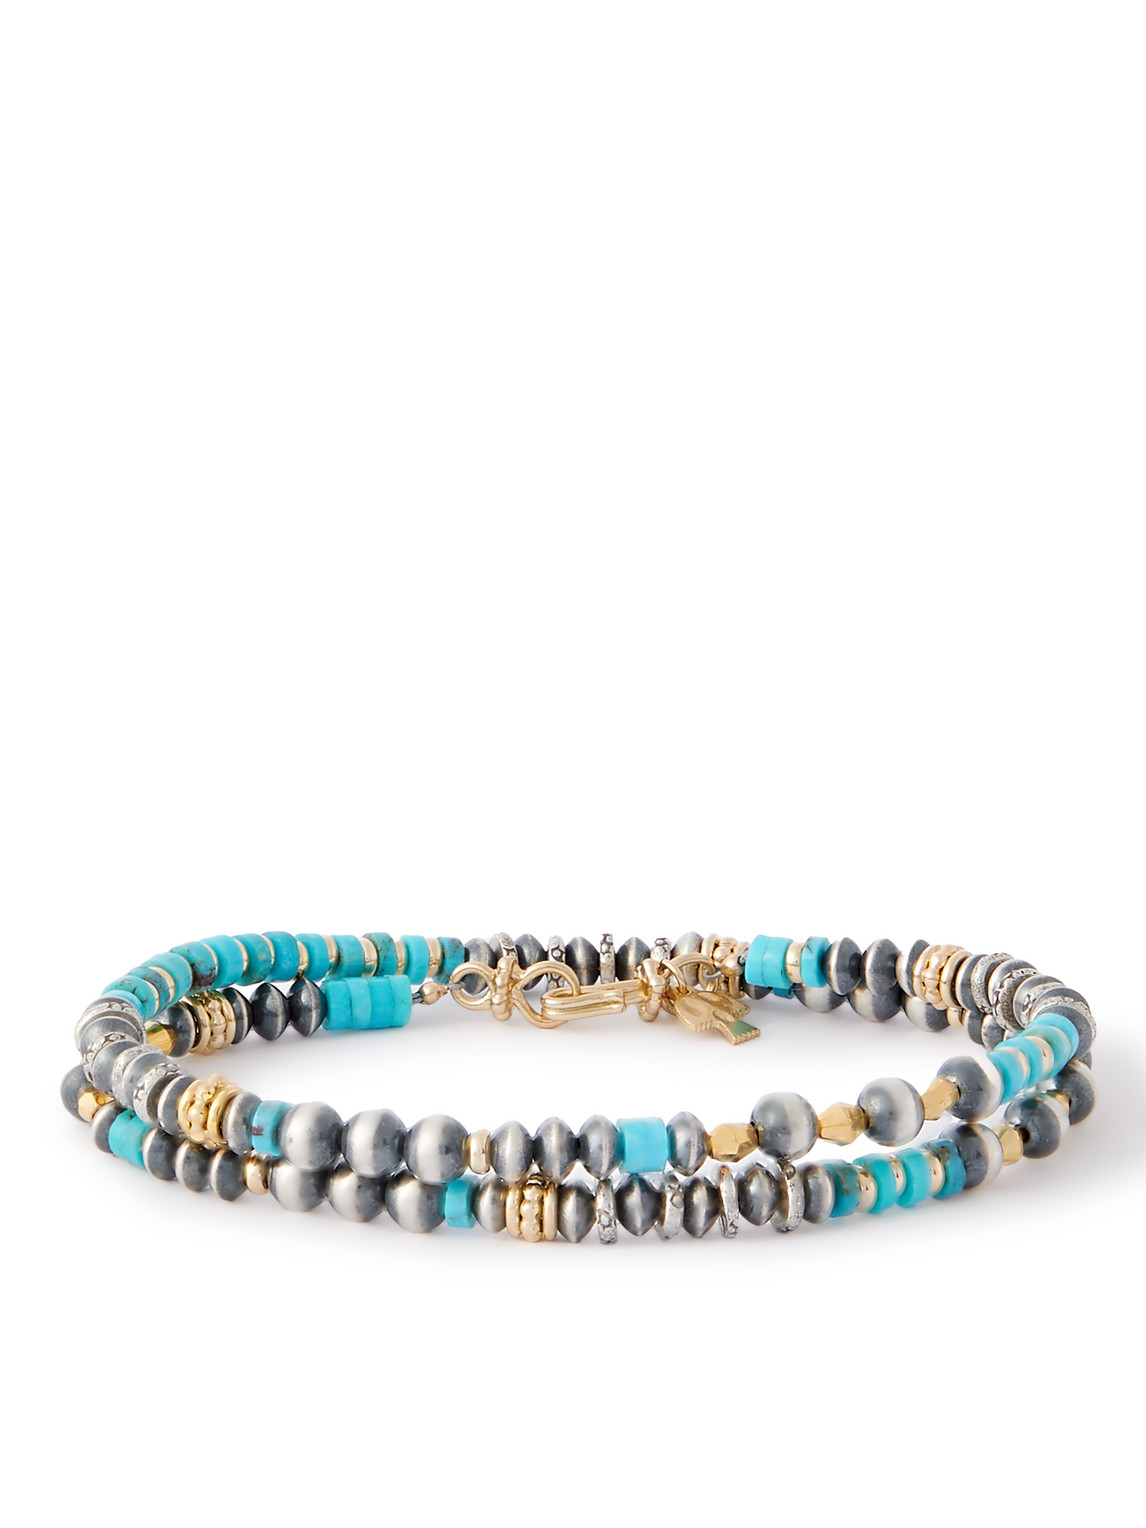 Peyote Bird Le Mans Silver, Gold-plated And Turquoise Beaded Wrap Bracelet In Blue